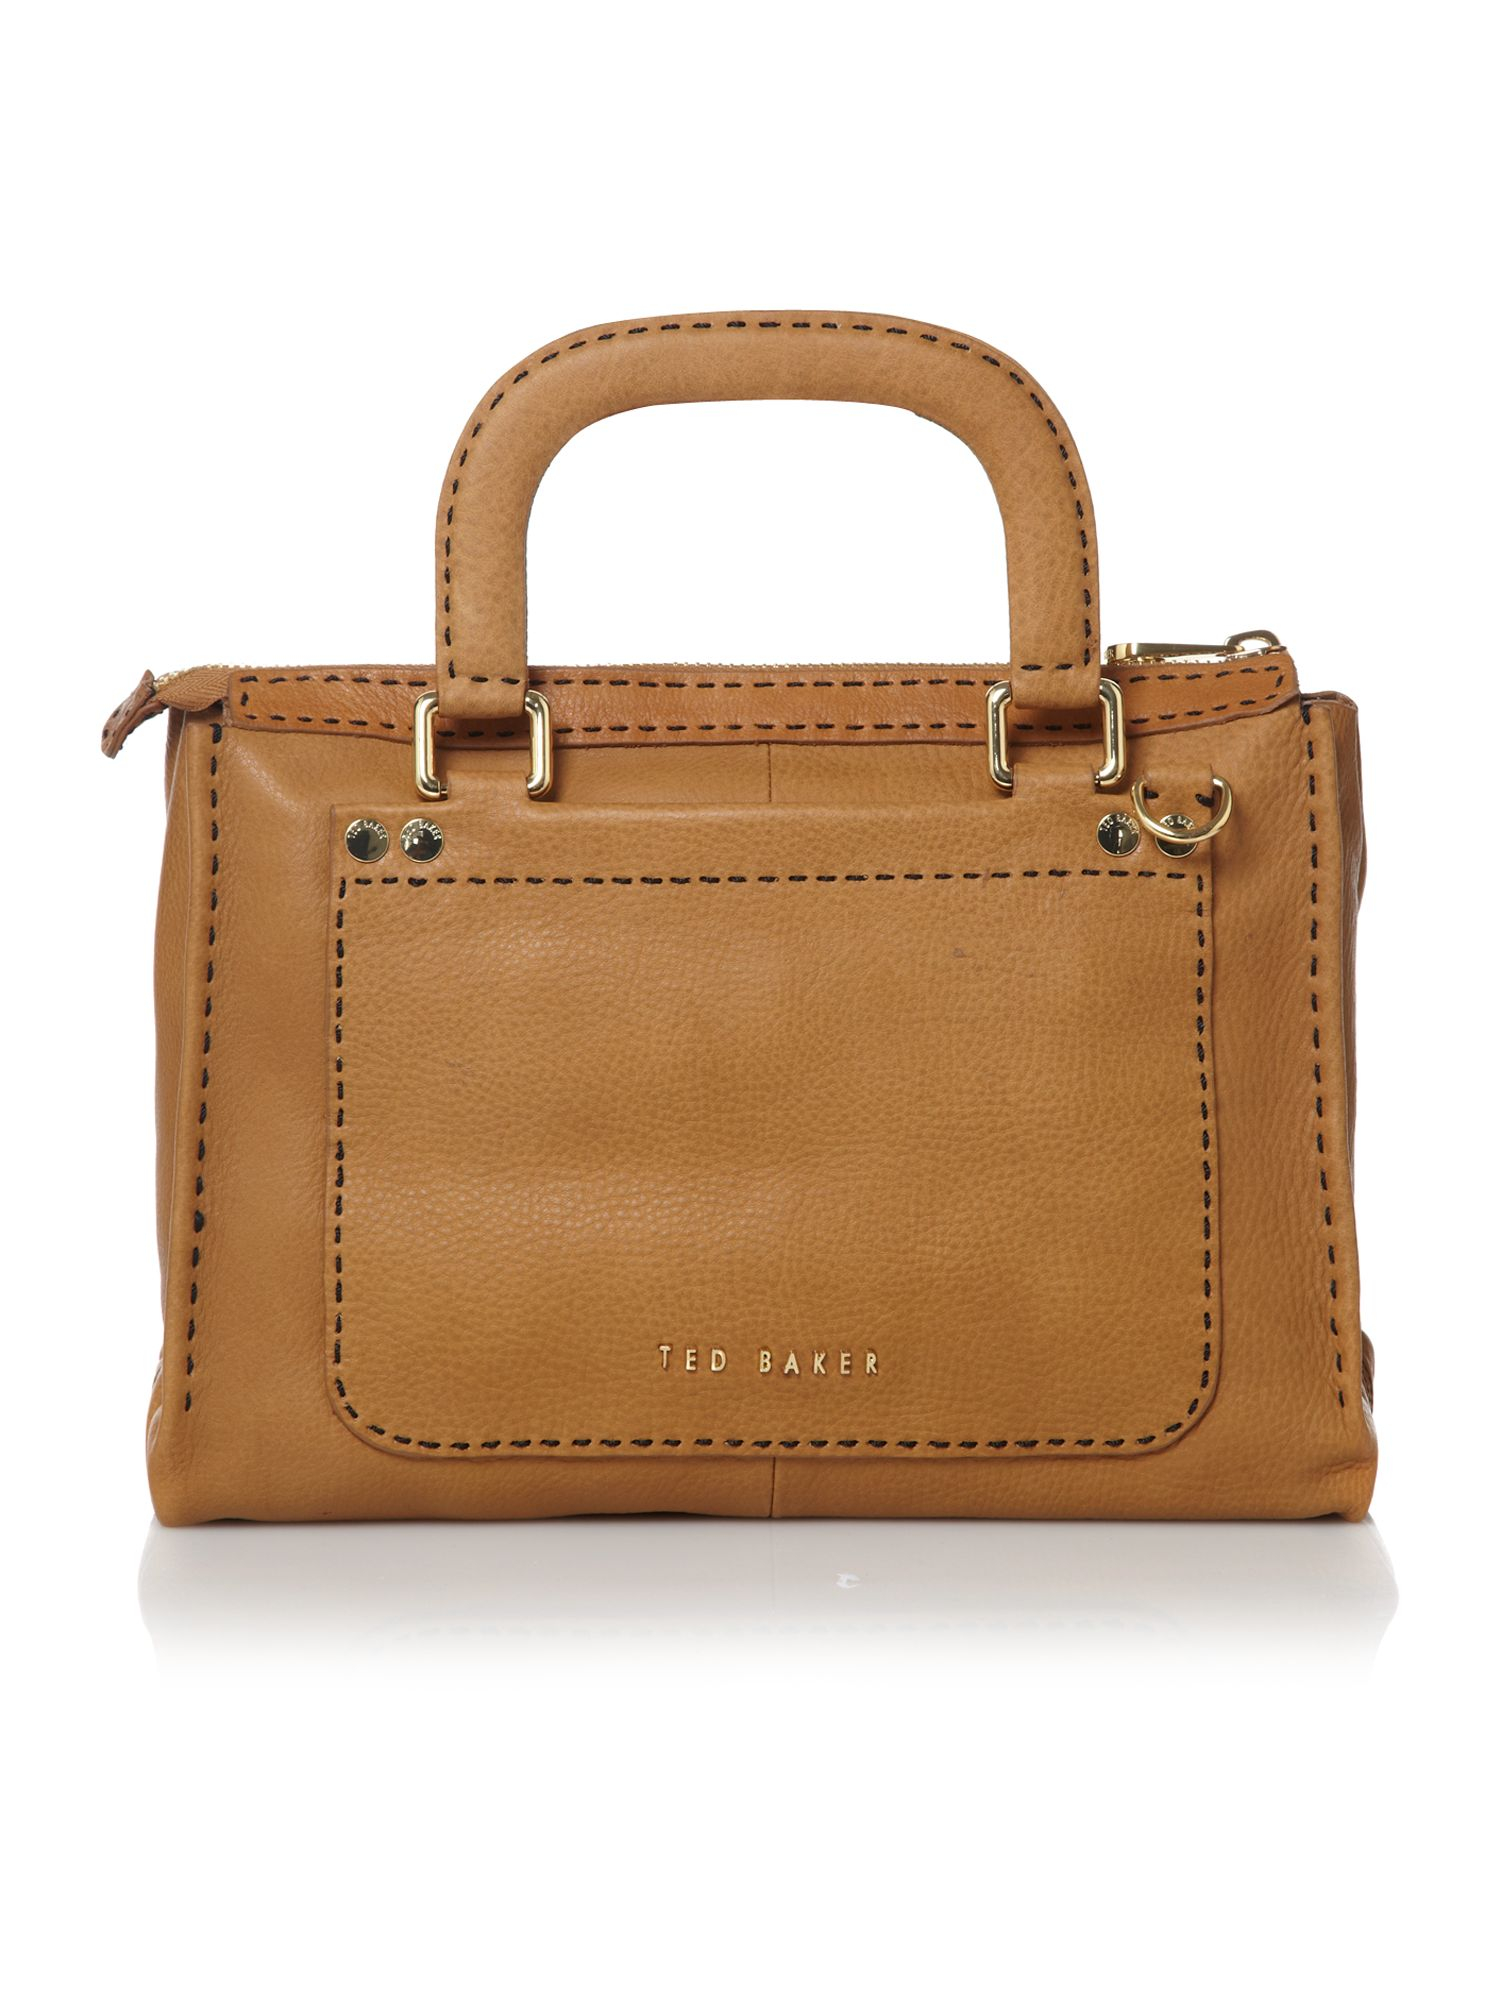 Ted baker Hickory Stitch Tote Bag in Brown | Lyst